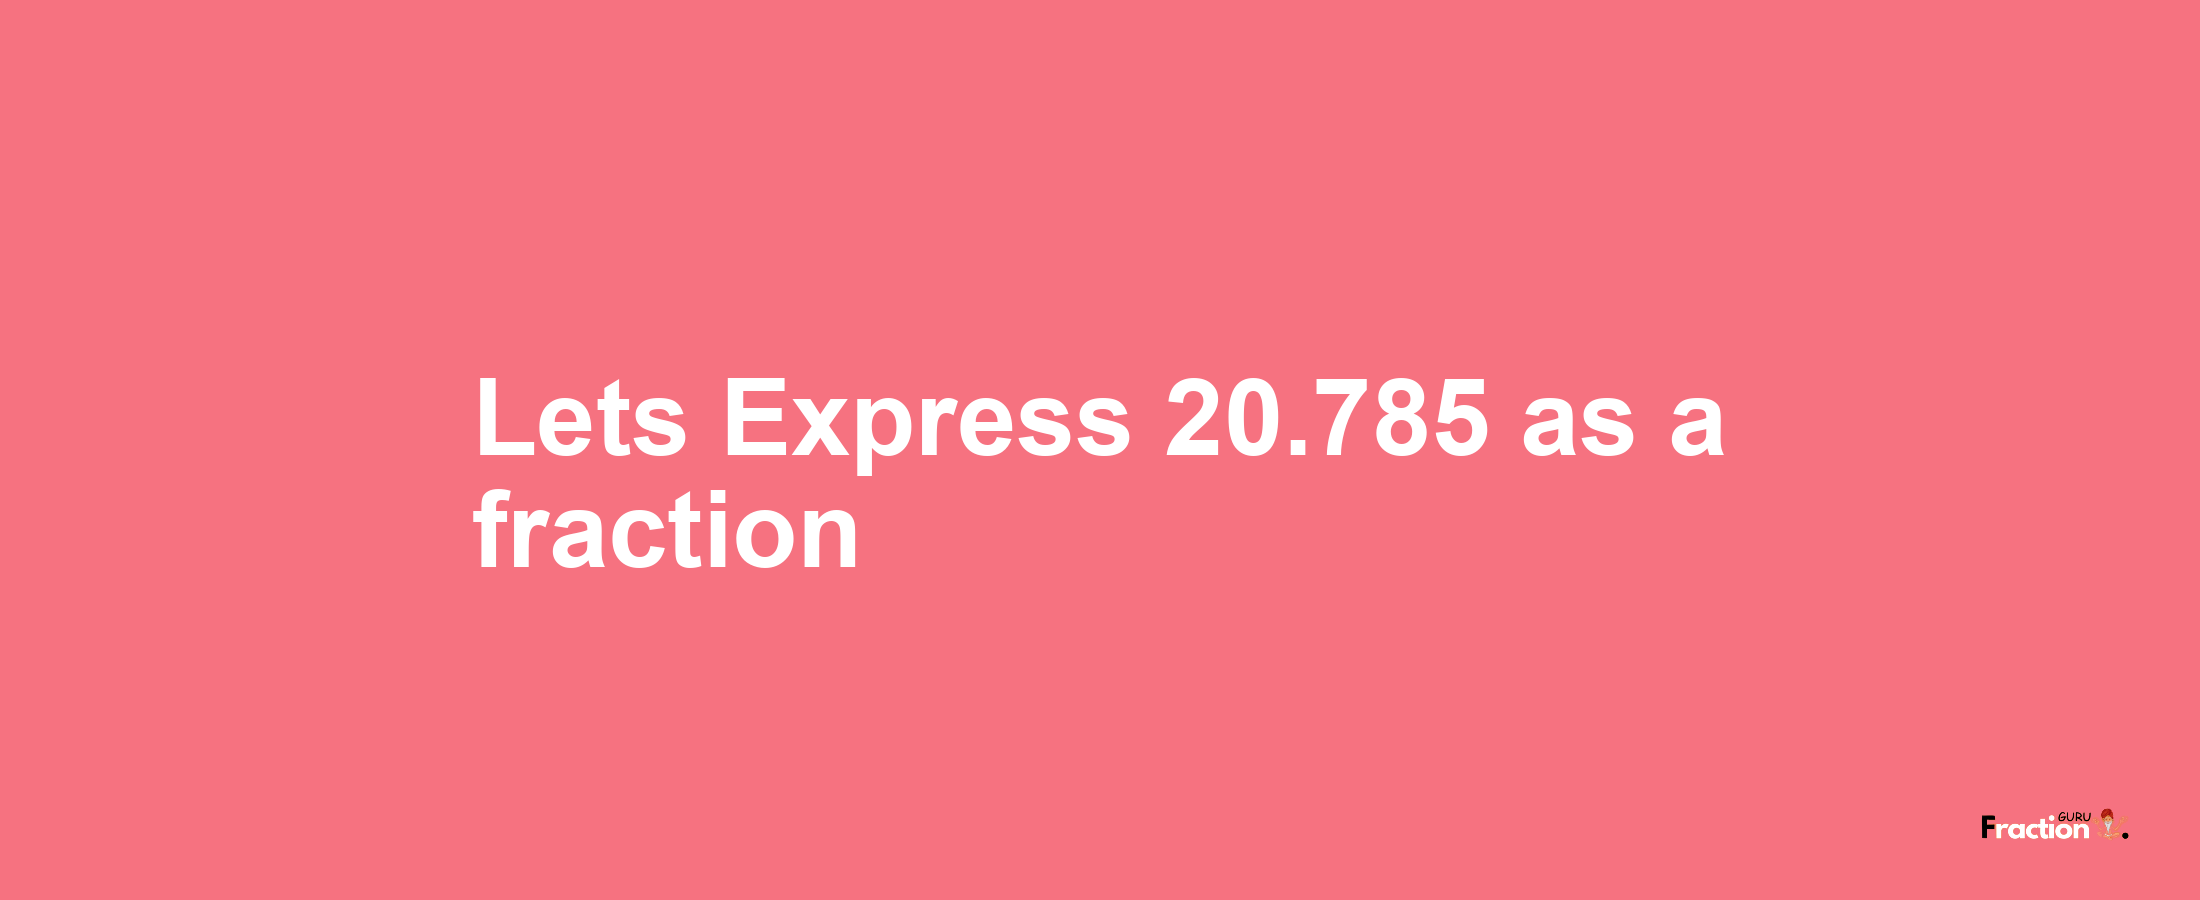 Lets Express 20.785 as afraction